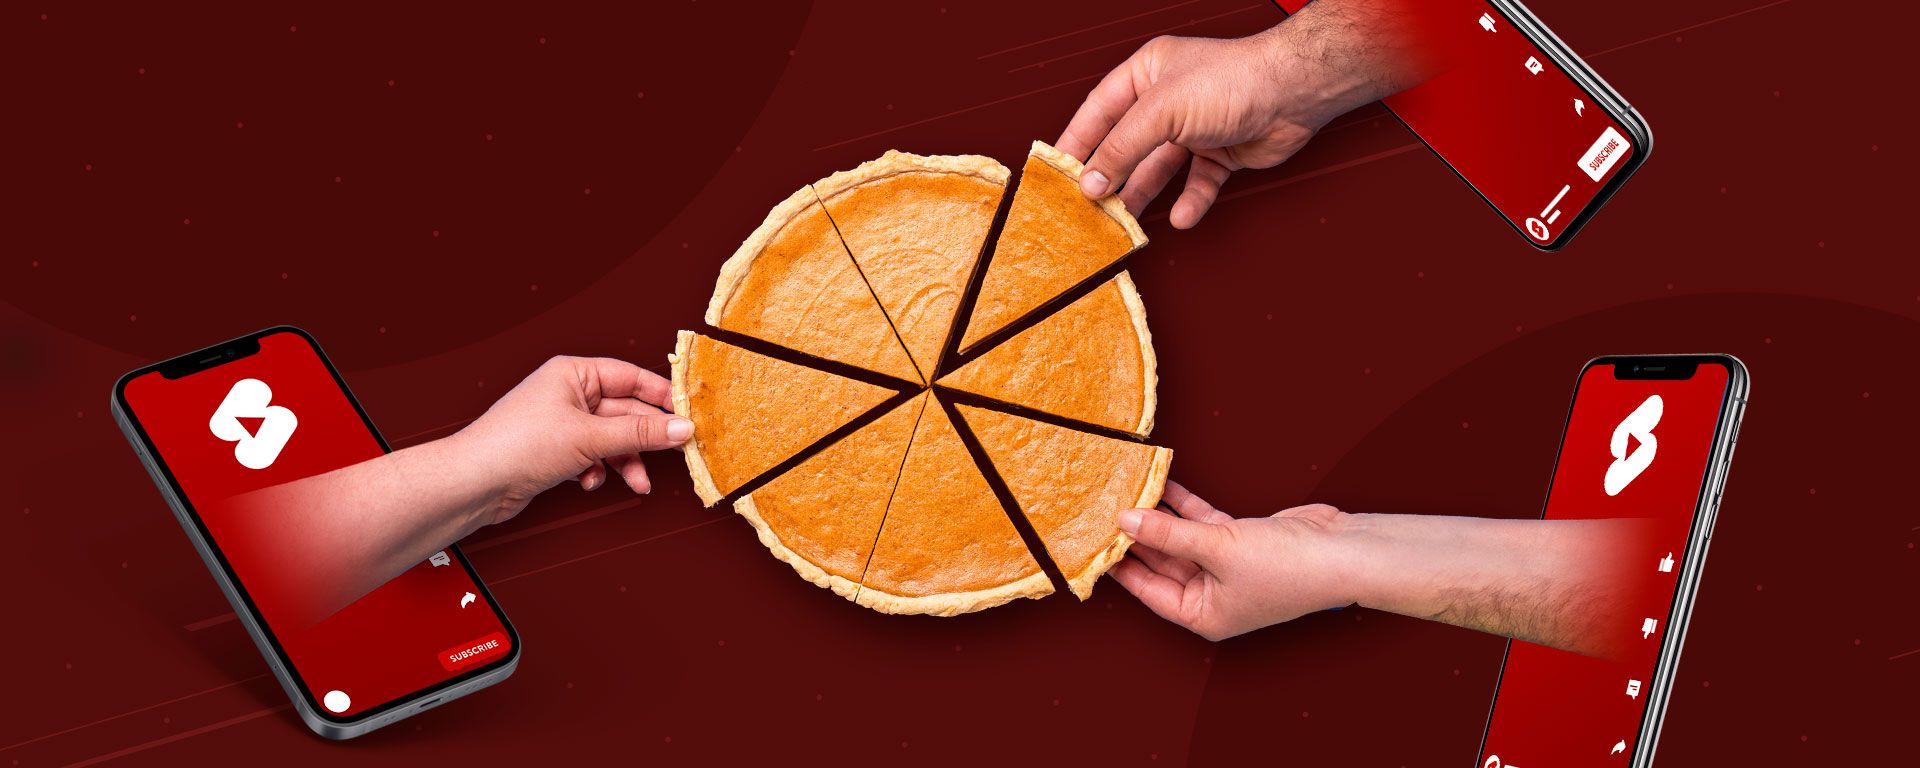 Image of YouTube creators' hands reaching out of Shorts on phone screens to reach for their share of a pie, representing ad revenue sharing on YouTube Shorts.